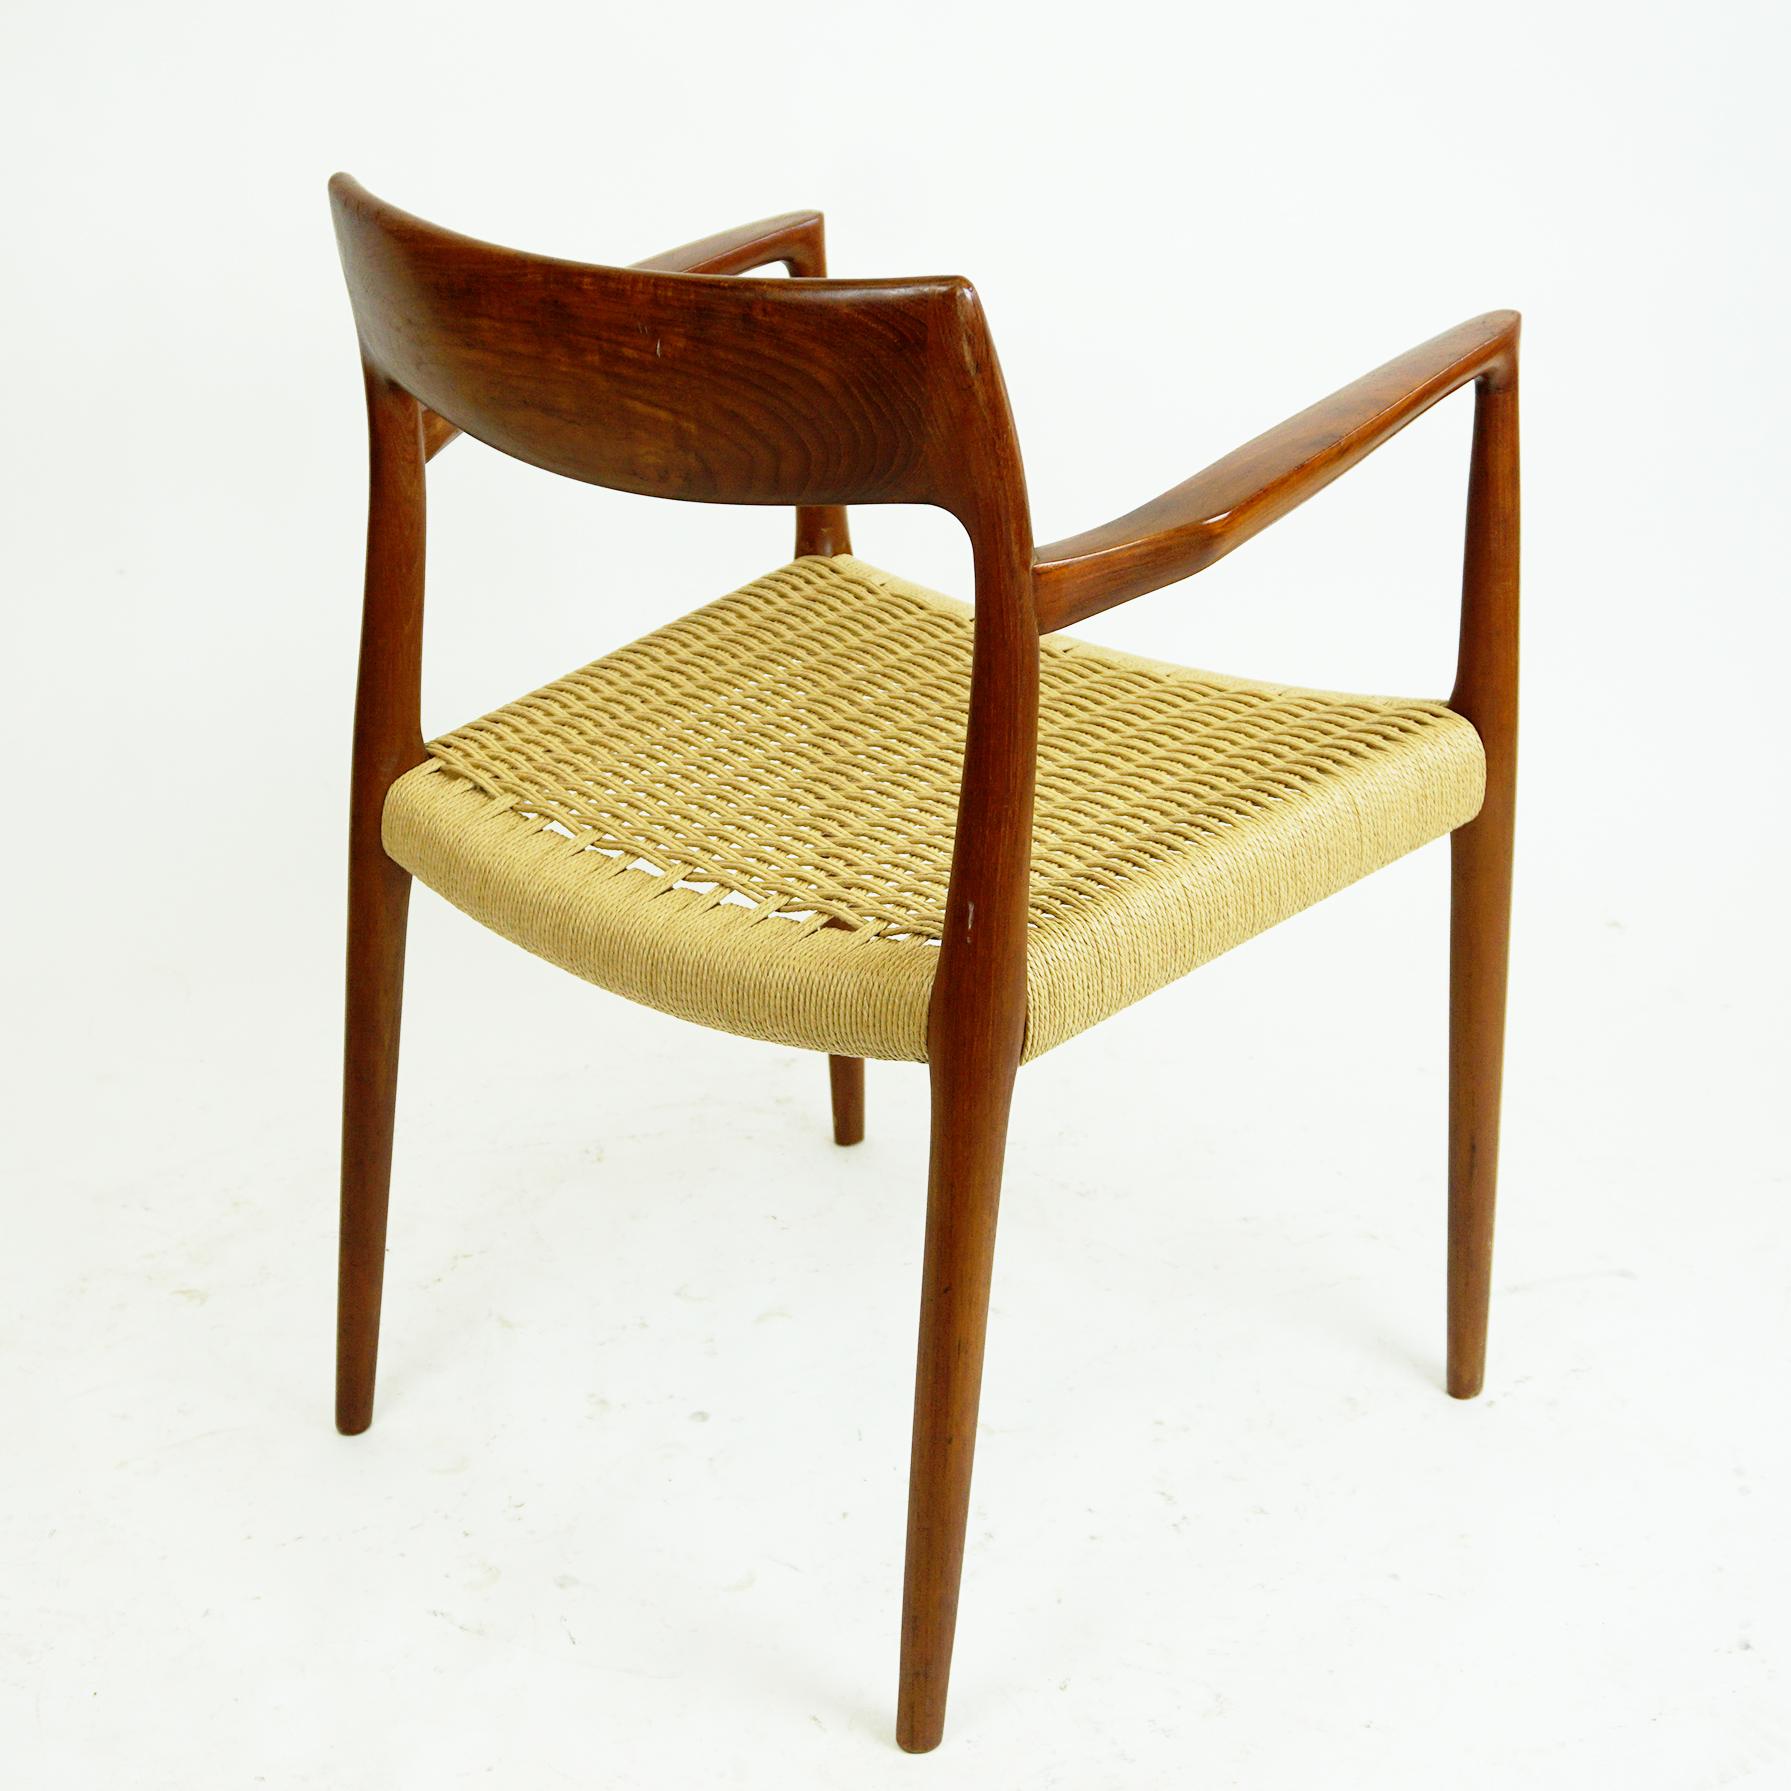 Mid-20th Century Scandinavian Modern Mod. 57 Teak and Papercord Armchair by Niels Otto Moller For Sale